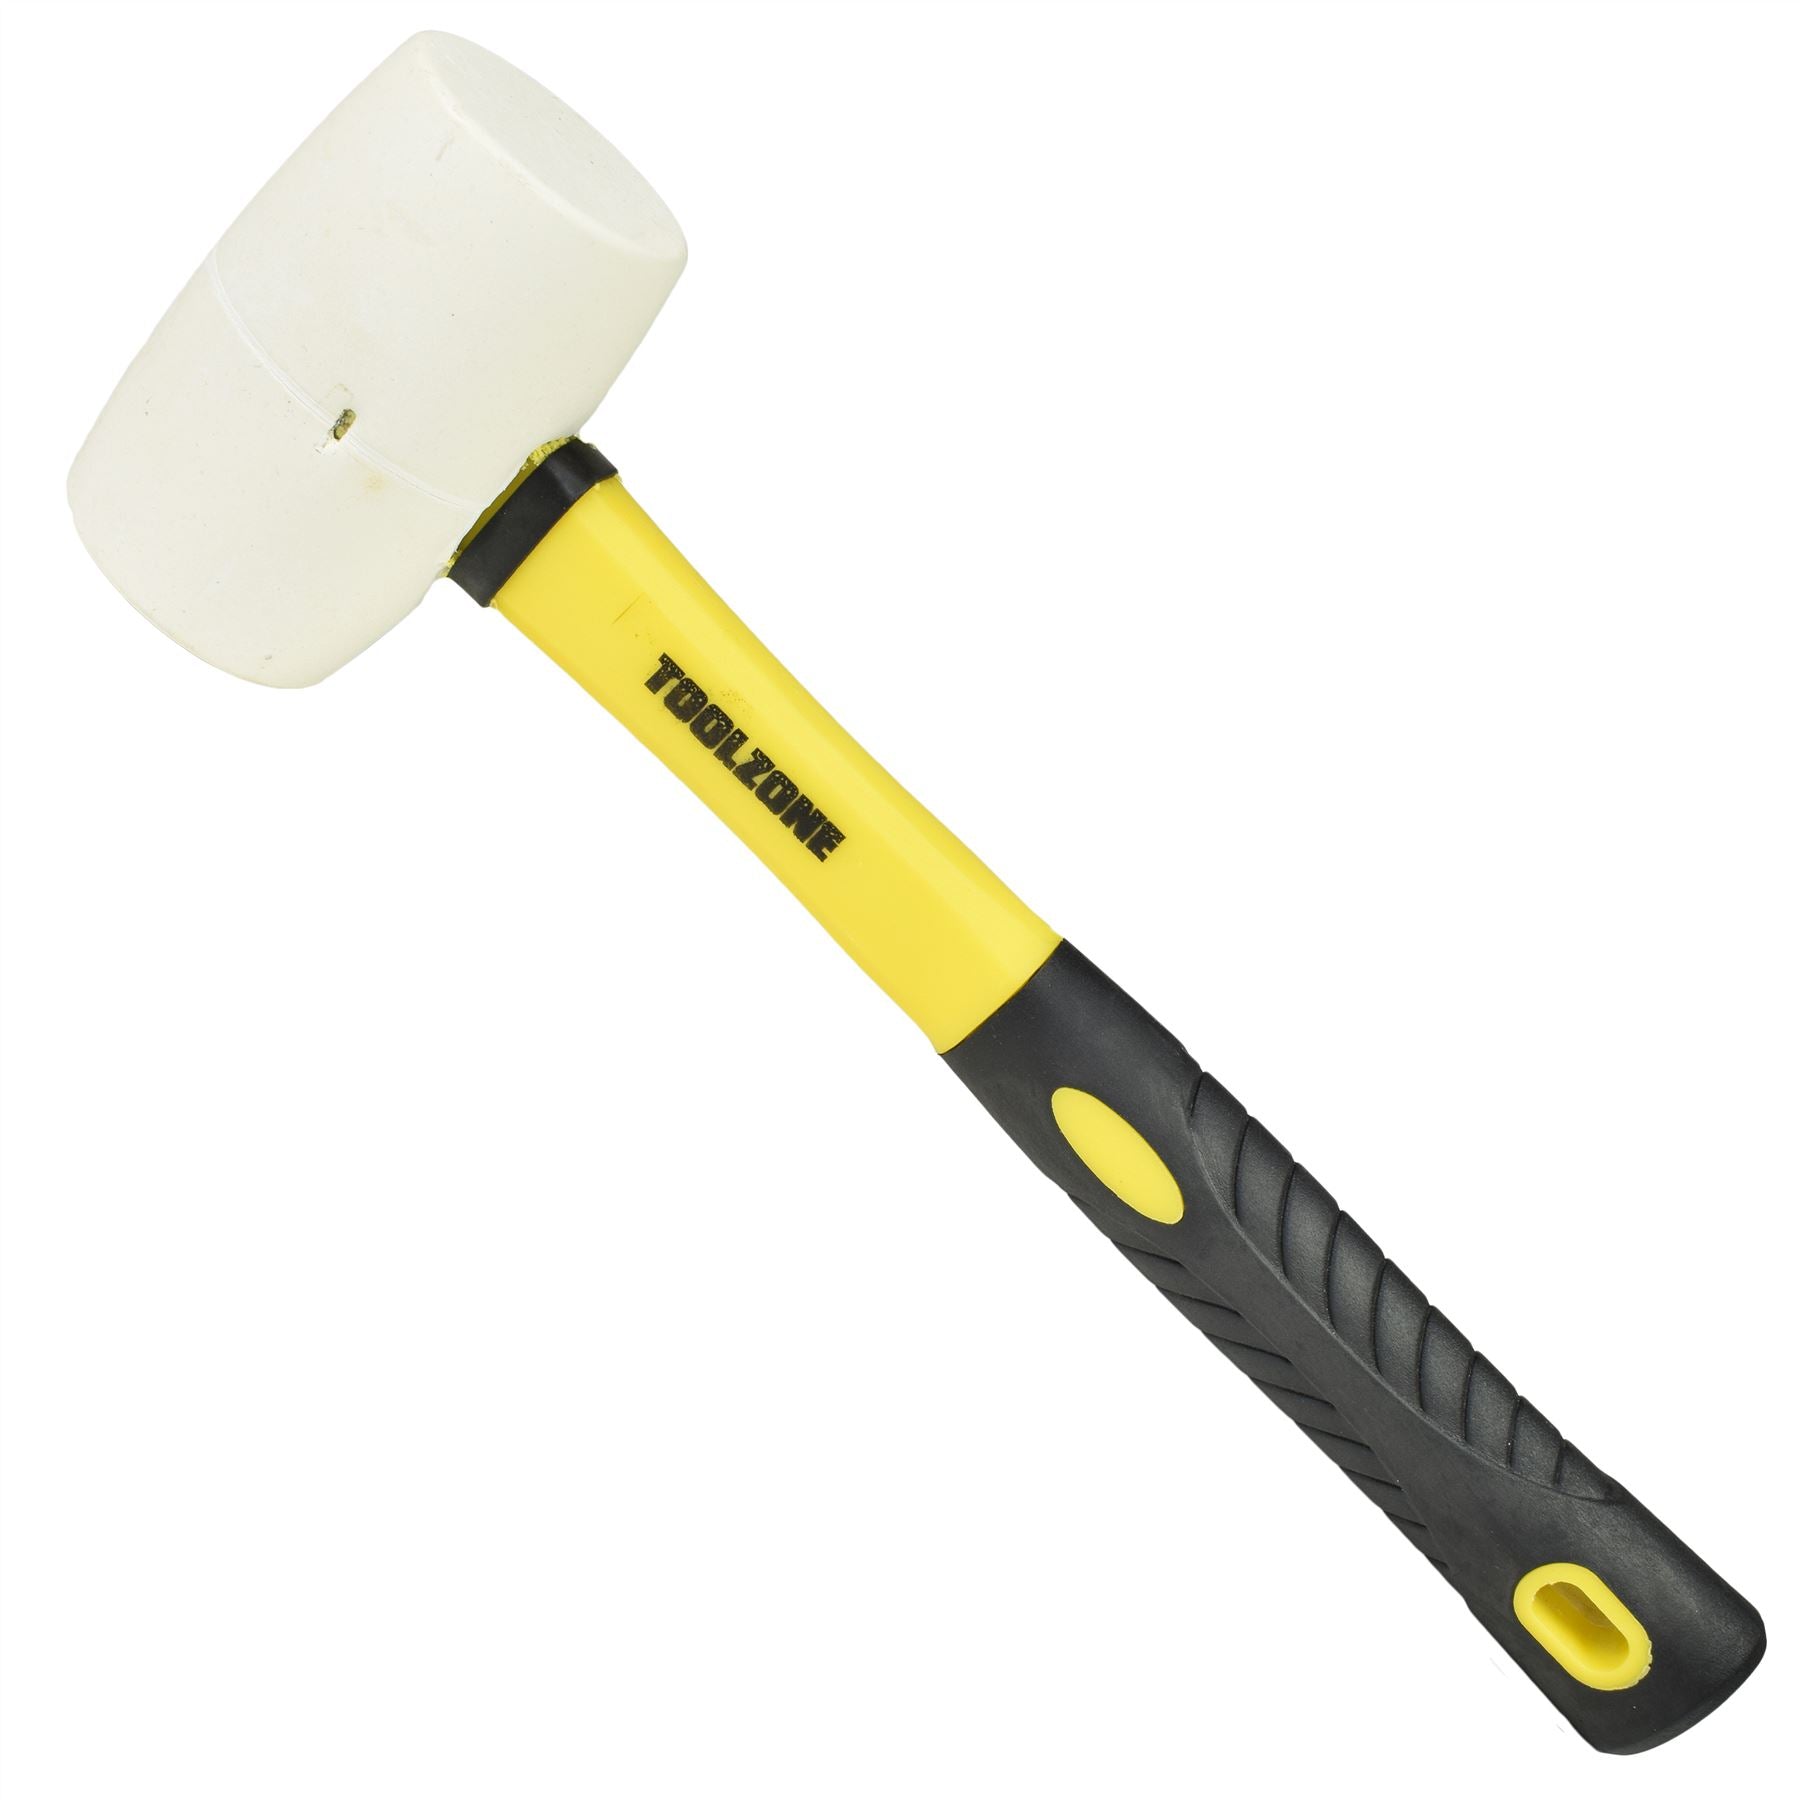 16oz White Rubber Mallet Non Marking Hammer With Fibreglass Handle Shaft